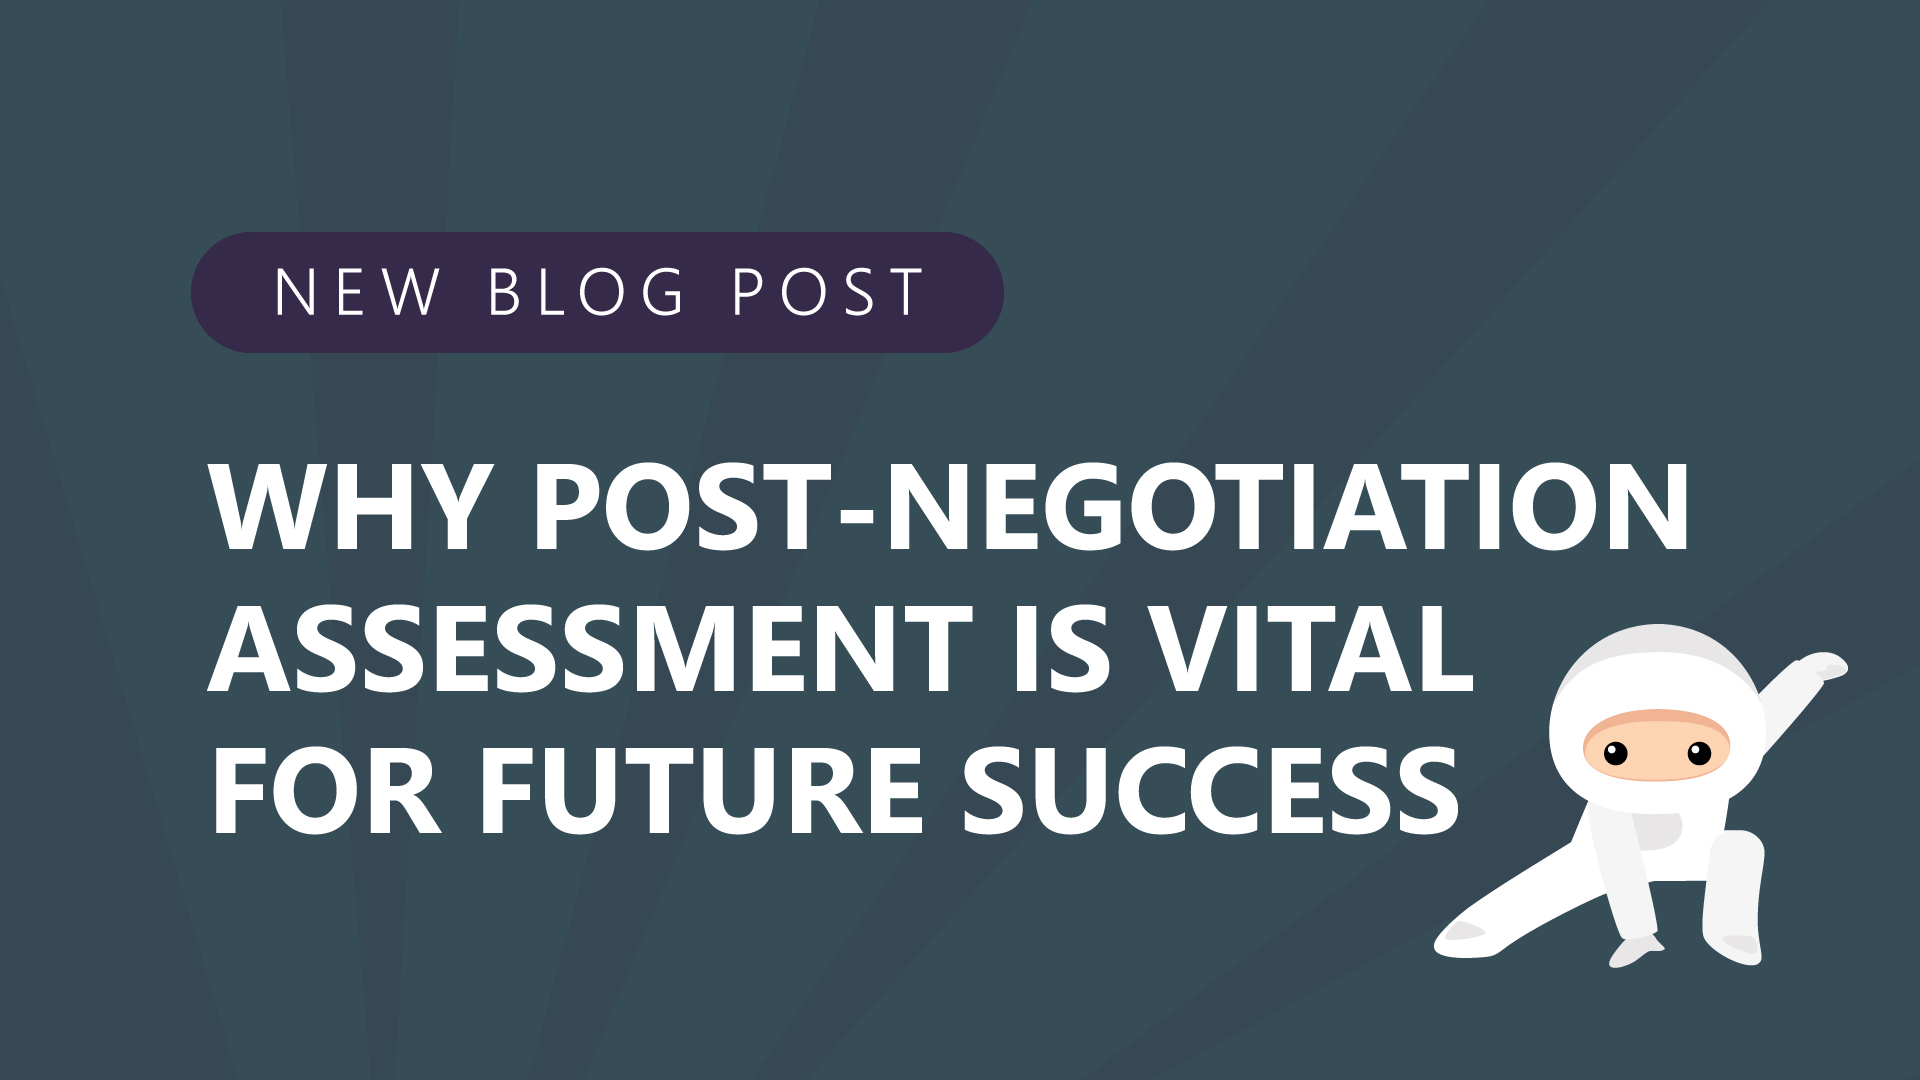 91-Why-Post-Negotiation-Assessment-Is-Vital-For-Future-Success.jpg